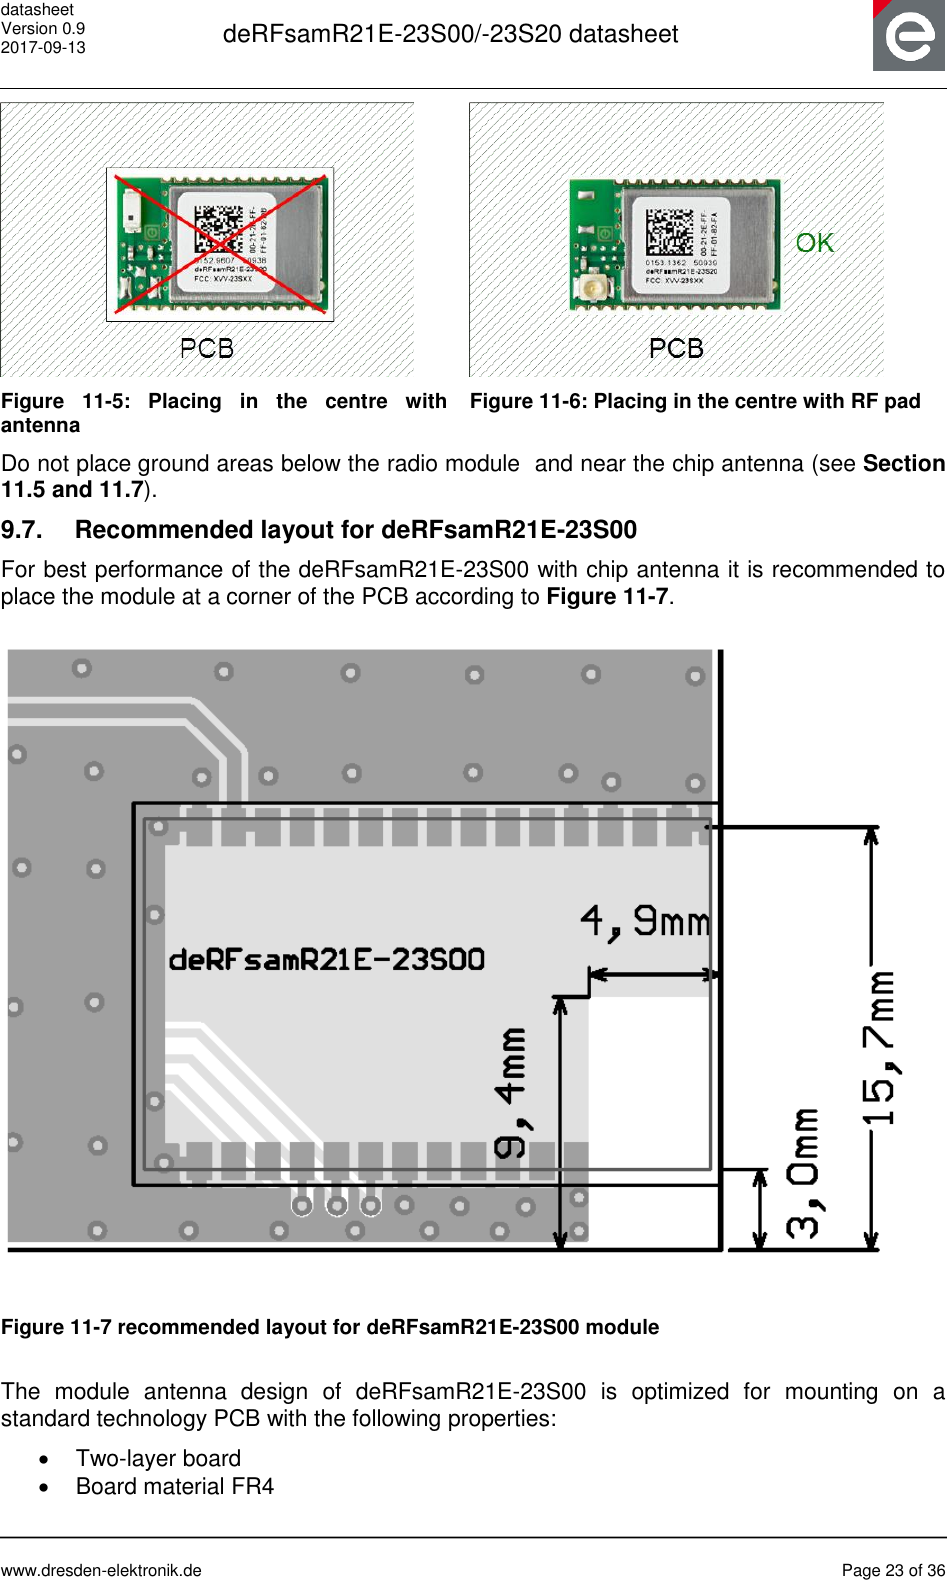 datasheet Version 0.9 2017-09-13  deRFsamR21E-23S00/-23S20 datasheet      www.dresden-elektronik.de  Page 23 of 36   Figure  11-5:  Placing  in  the  centre  with antenna  Figure 11-6: Placing in the centre with RF pad Do not place ground areas below the radio module  and near the chip antenna (see Section 11.5 and 11.7). 9.7.  Recommended layout for deRFsamR21E-23S00 For best performance of the deRFsamR21E-23S00 with chip antenna it is recommended to place the module at a corner of the PCB according to Figure 11-7.   Figure 11-7 recommended layout for deRFsamR21E-23S00 module  The  module  antenna  design  of  deRFsamR21E-23S00  is  optimized  for  mounting  on  a standard technology PCB with the following properties:   Two-layer board    Board material FR4 